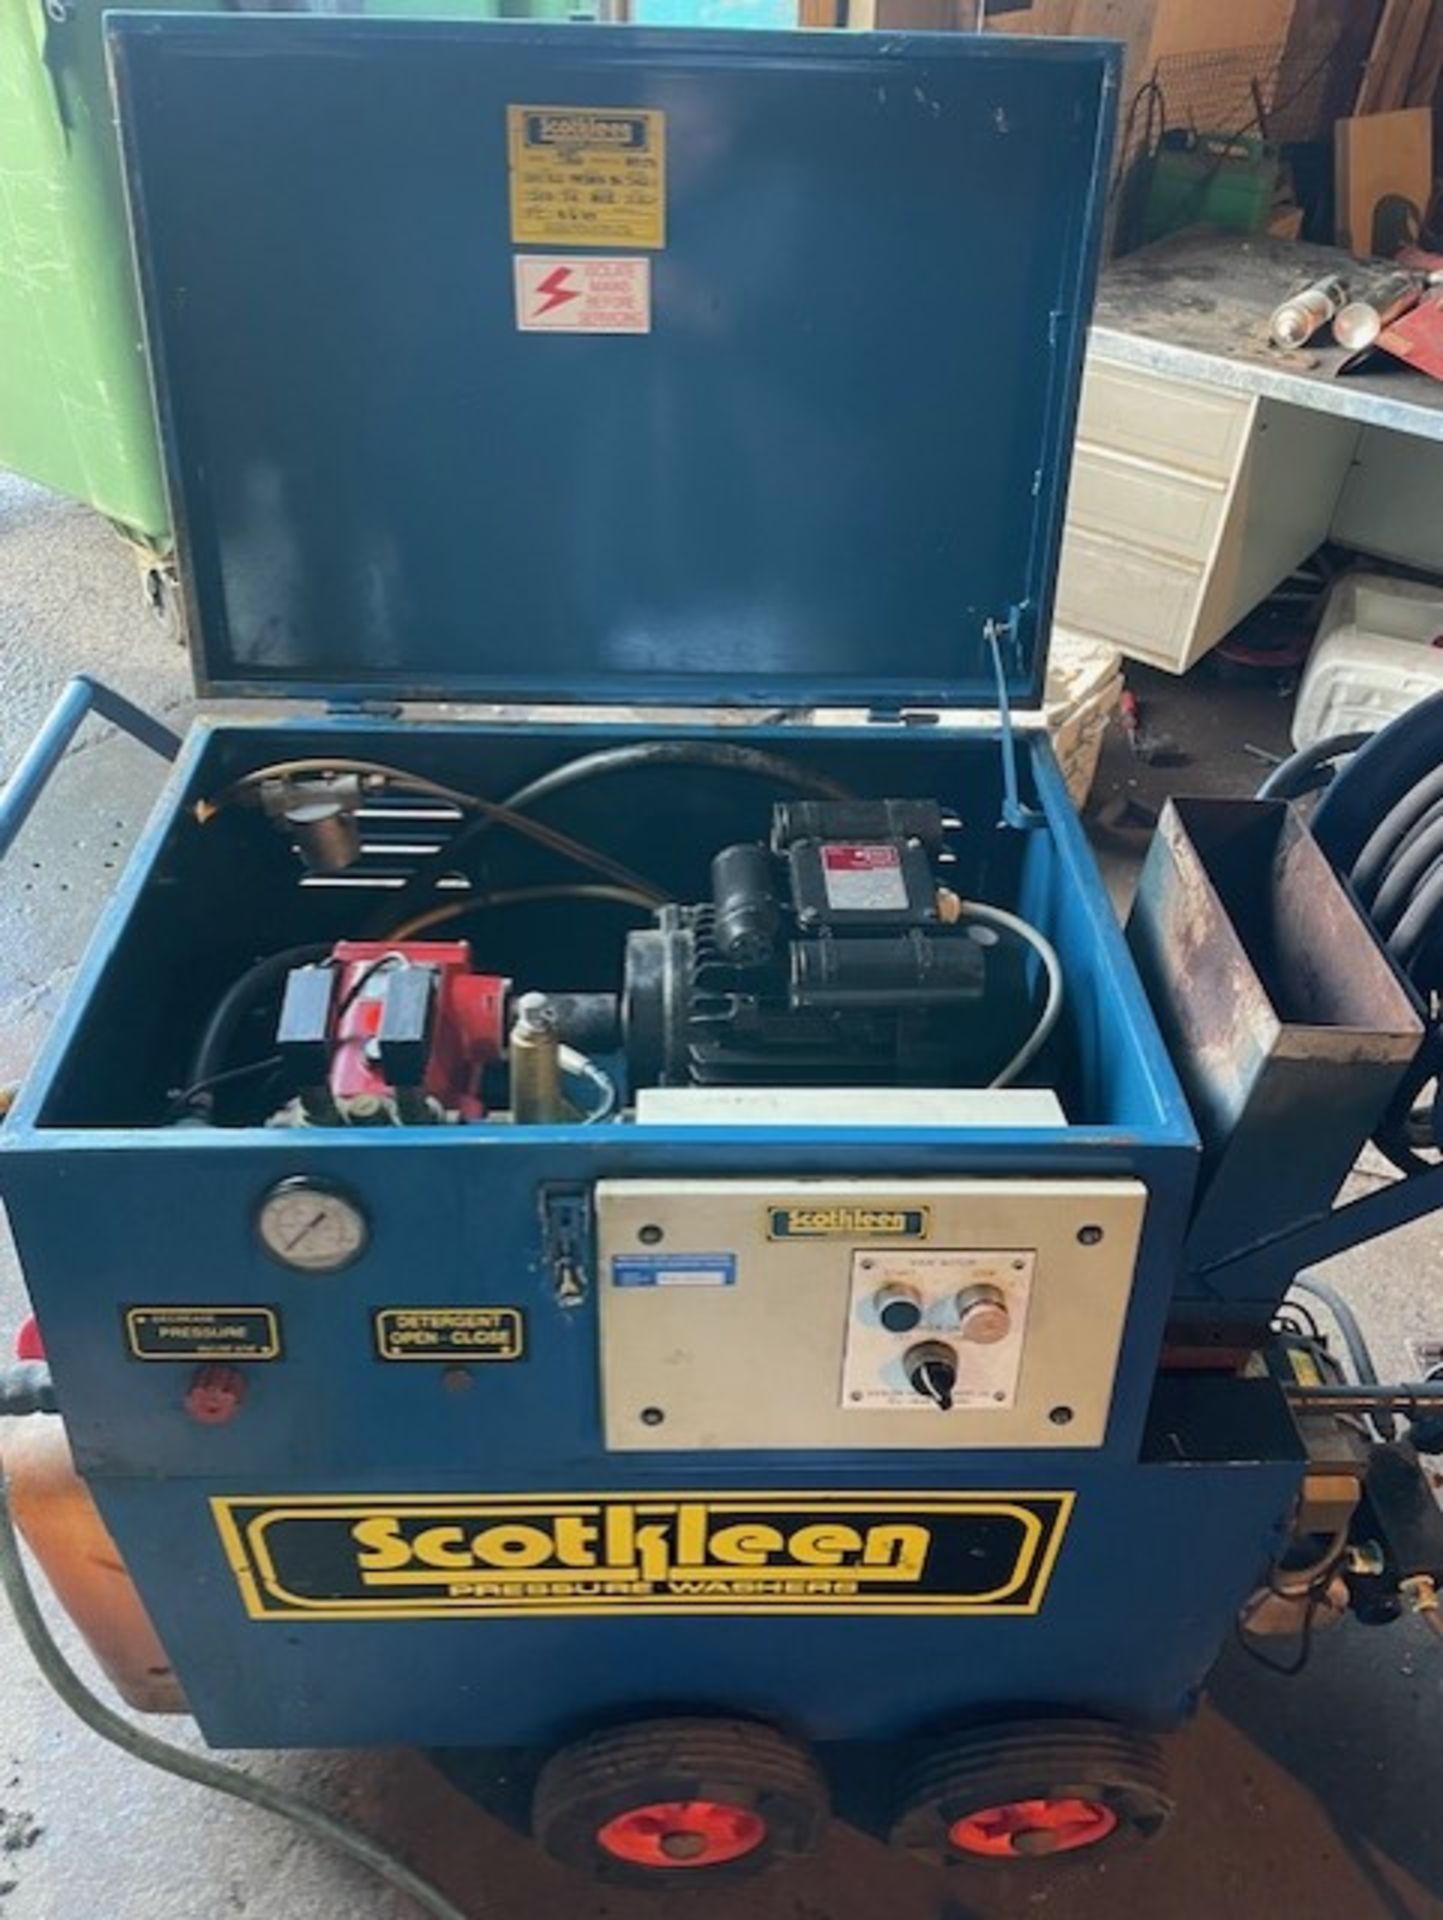 Real old school piece of kit it’s a scotklean 1200 hot wash it is a 110 volt on the 32 amp the